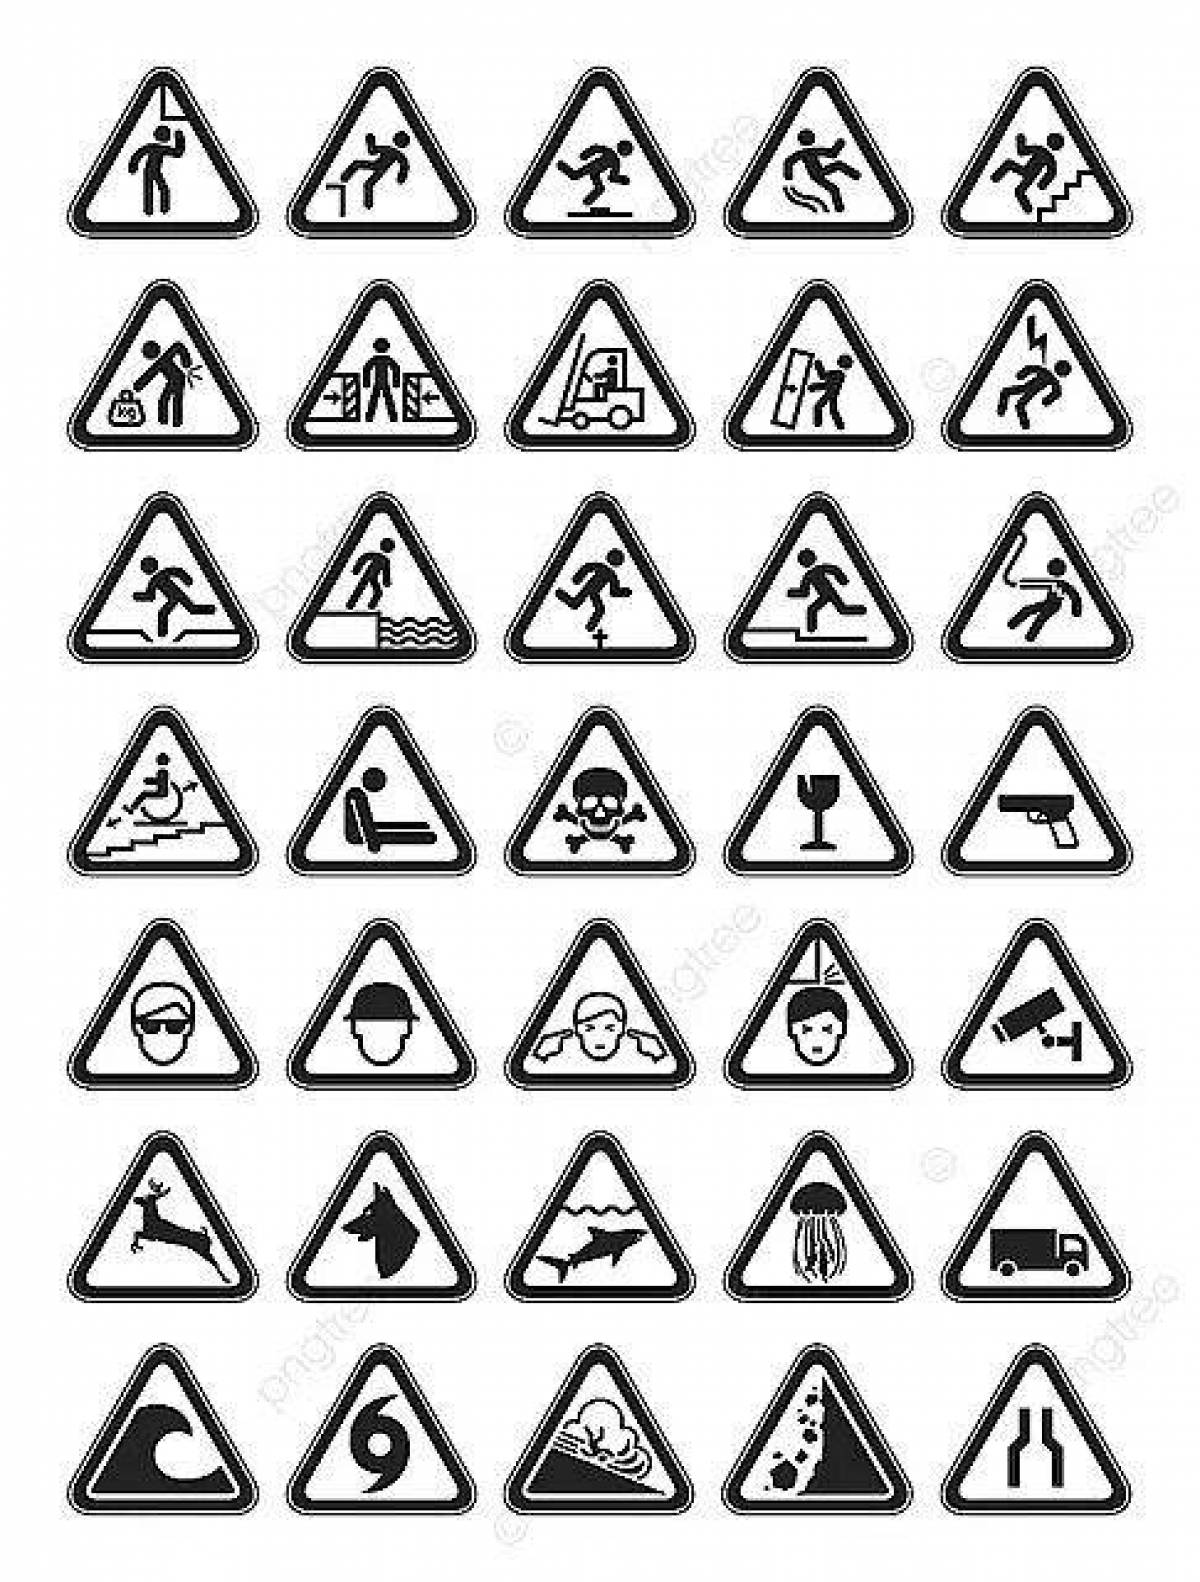 Coloring page with warning signs